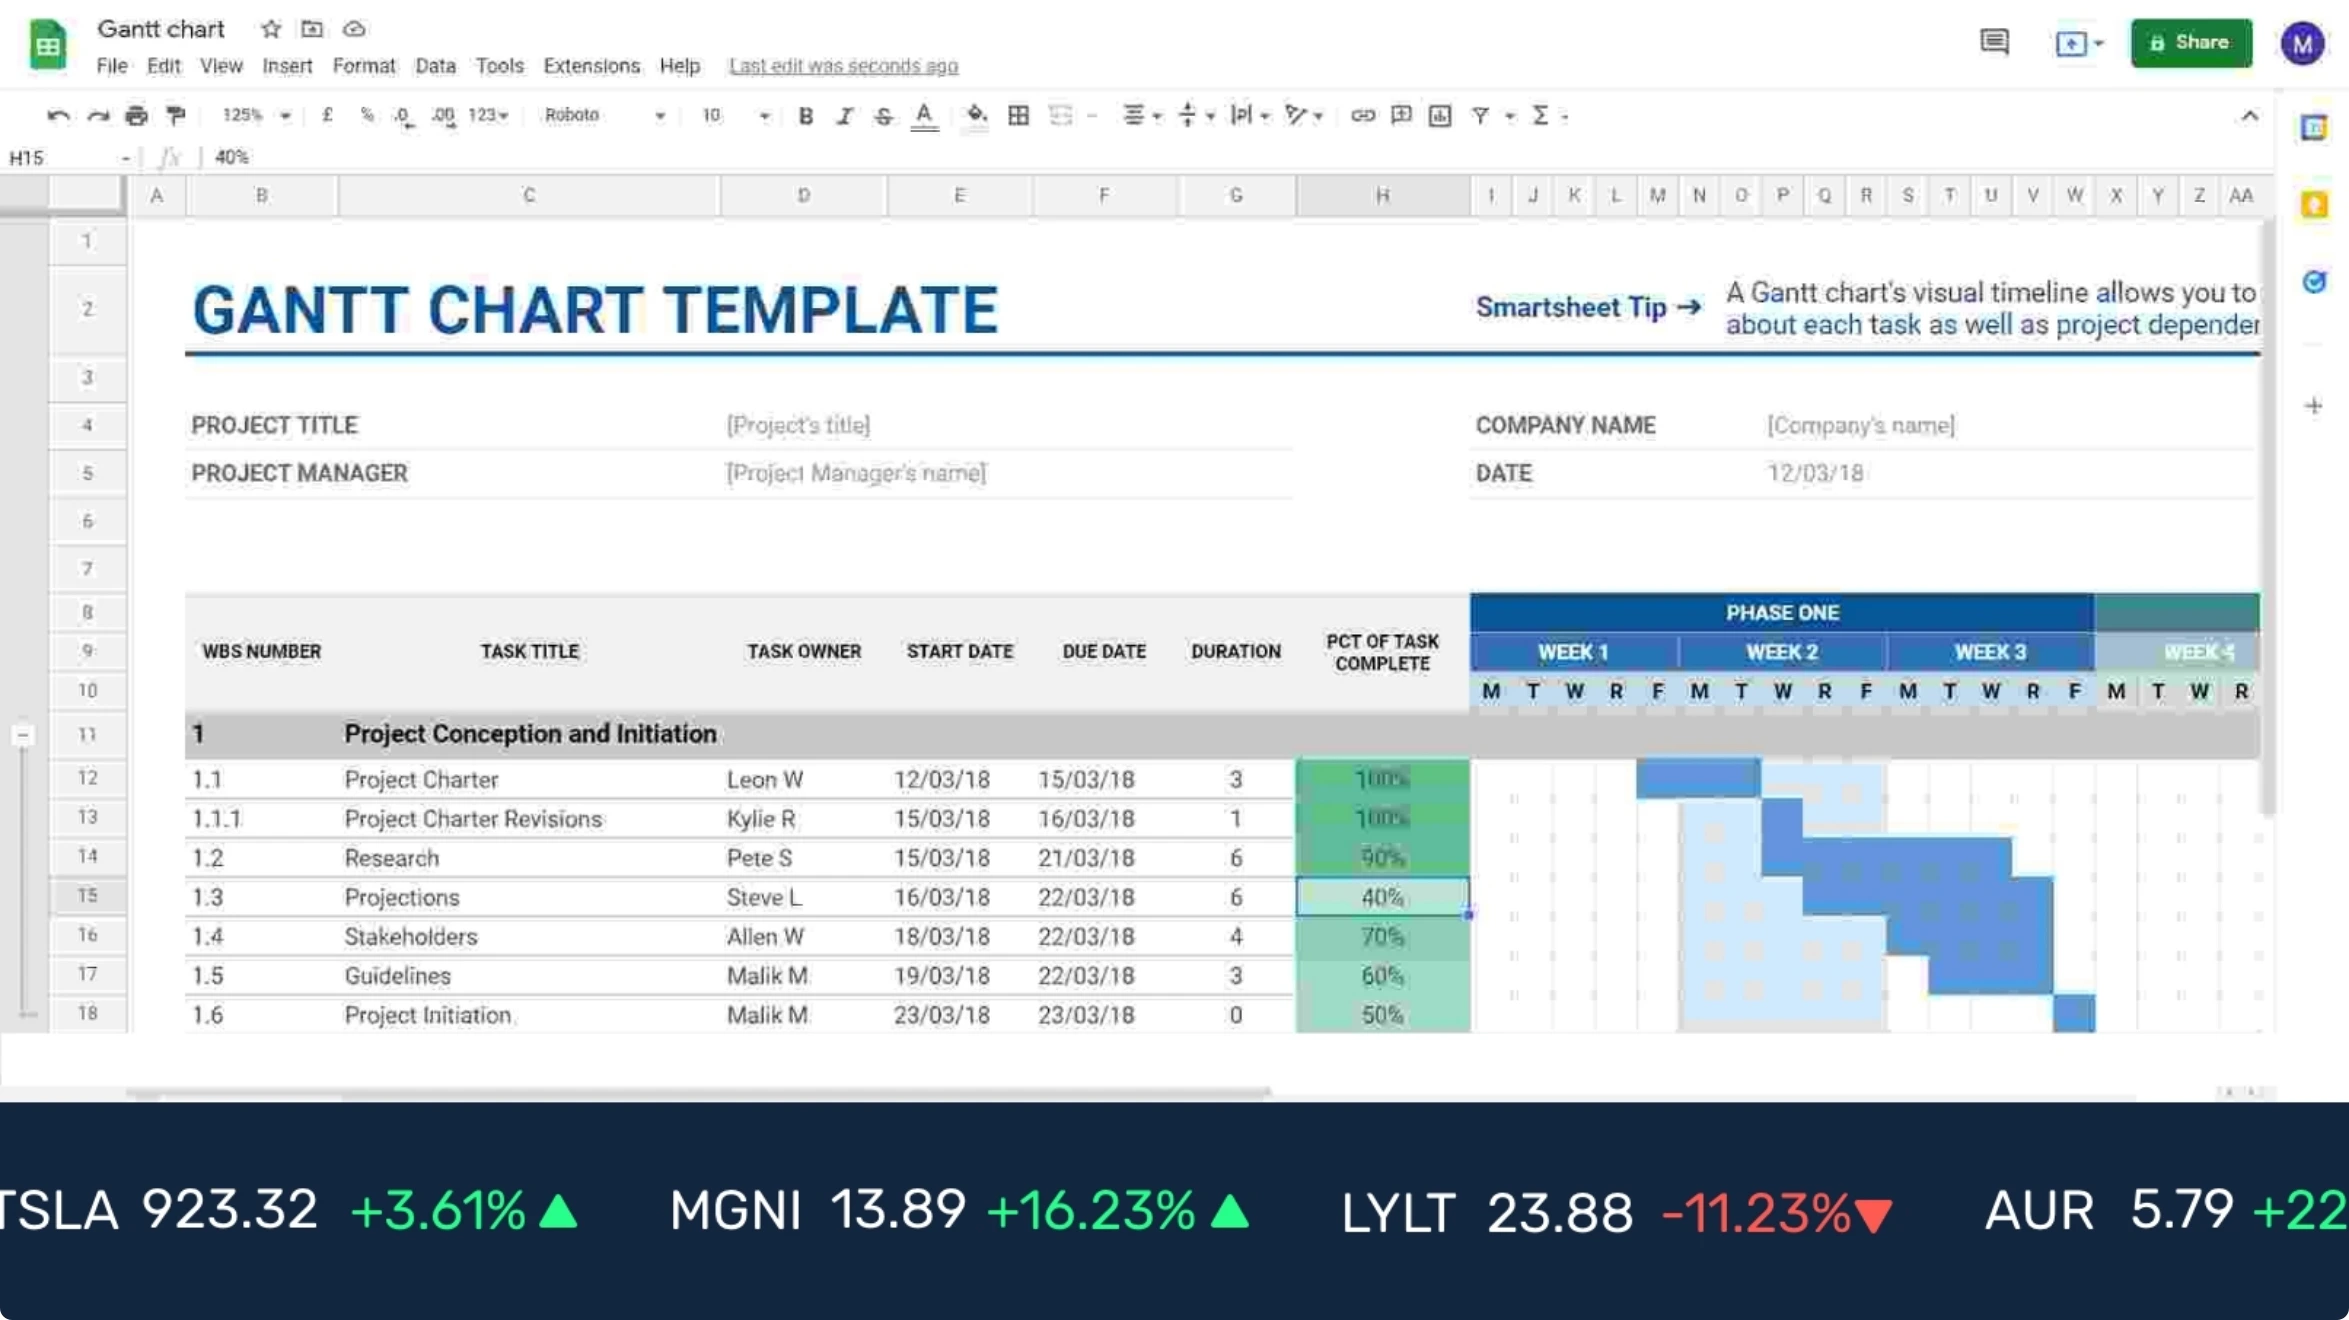 digital signage software interface showing composition layout with Google Sheets app and Stocks app contents